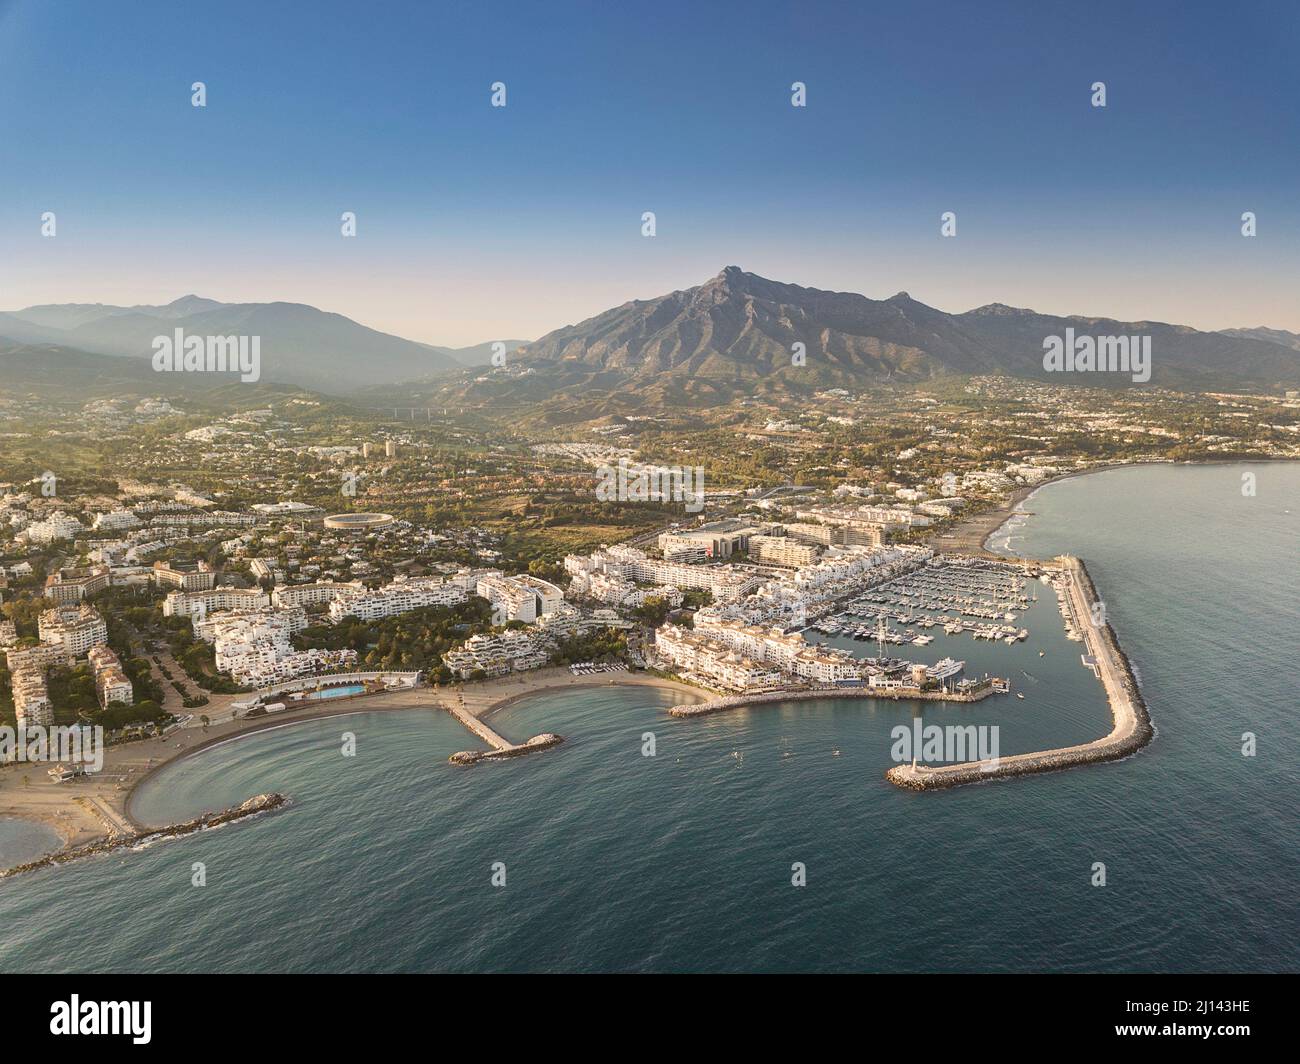 Aerial drone perspective of beautiful sunset over luxury Puerto Banus Bay in Marbella, Costa del Sol. Expensive lifestyle, luxury yachts. Stock Photo